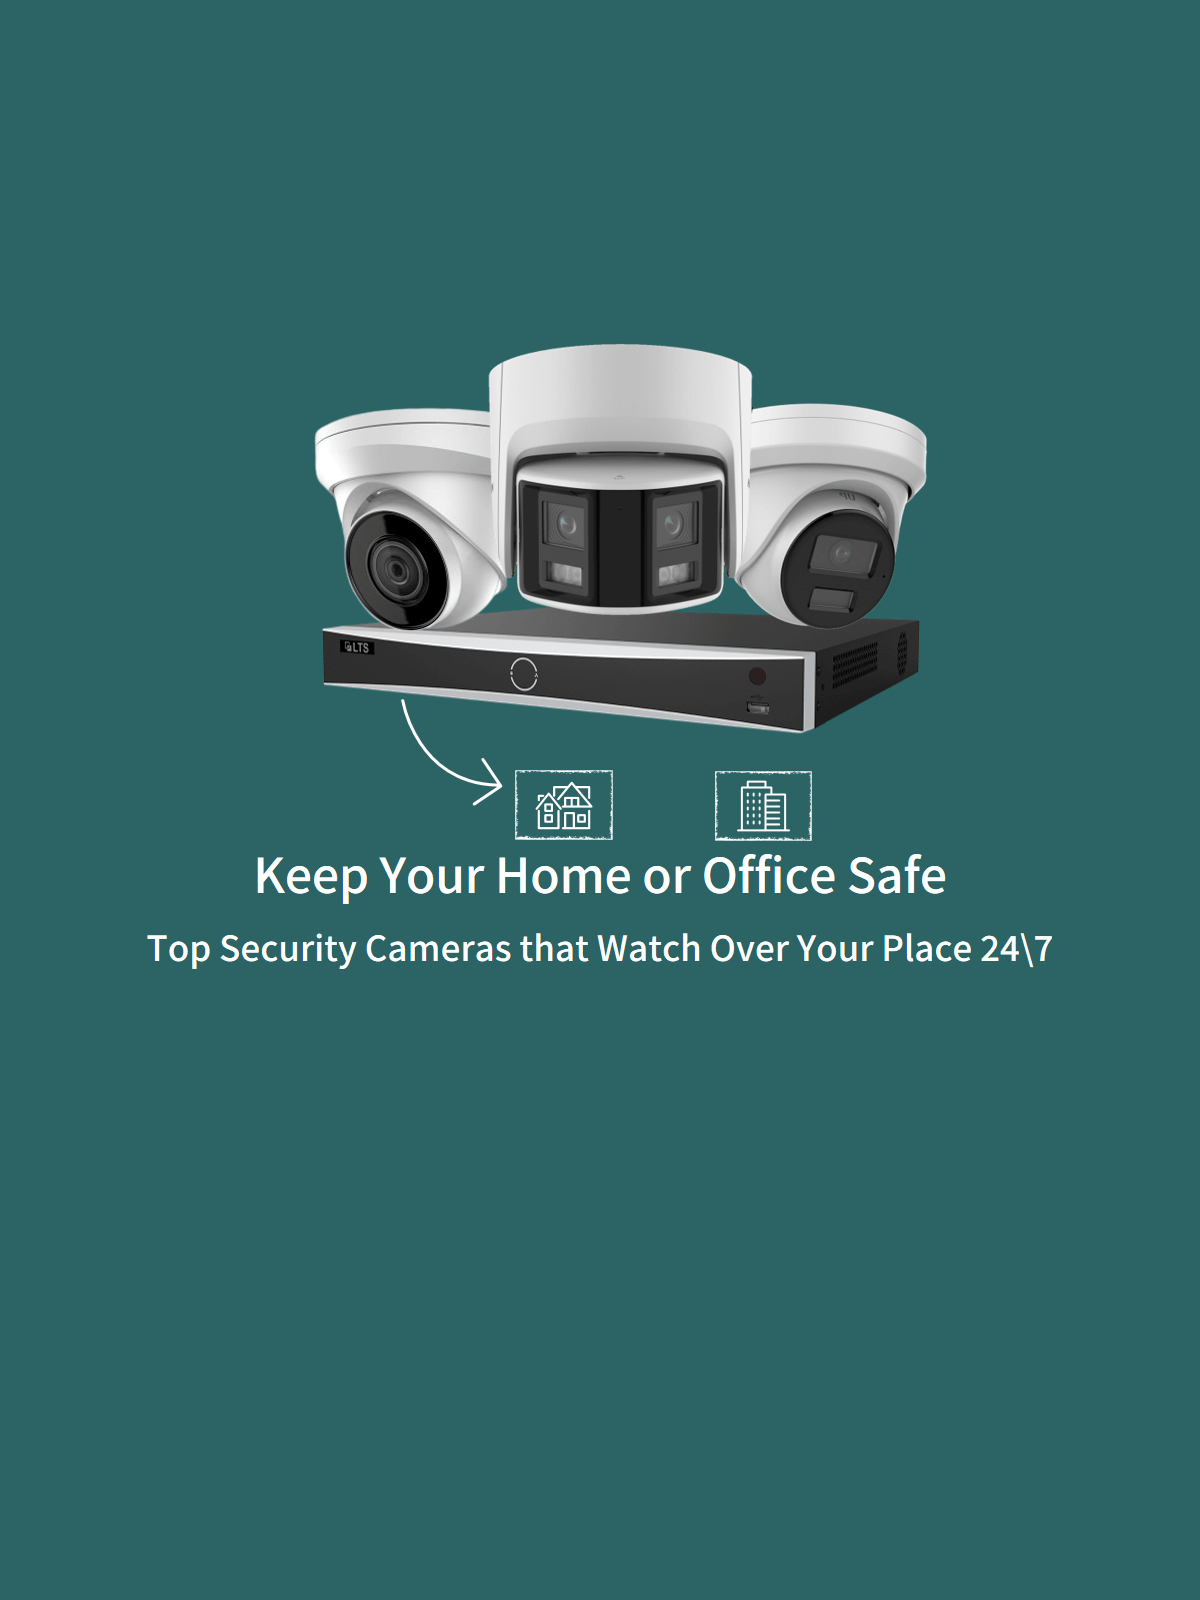 New Mobile Design of 3 Security Cameras Banner Slider Image with an NVR and text that says Keep your Home or Office Safe - Top Security Cameras That Watch Over Your Place 24/7